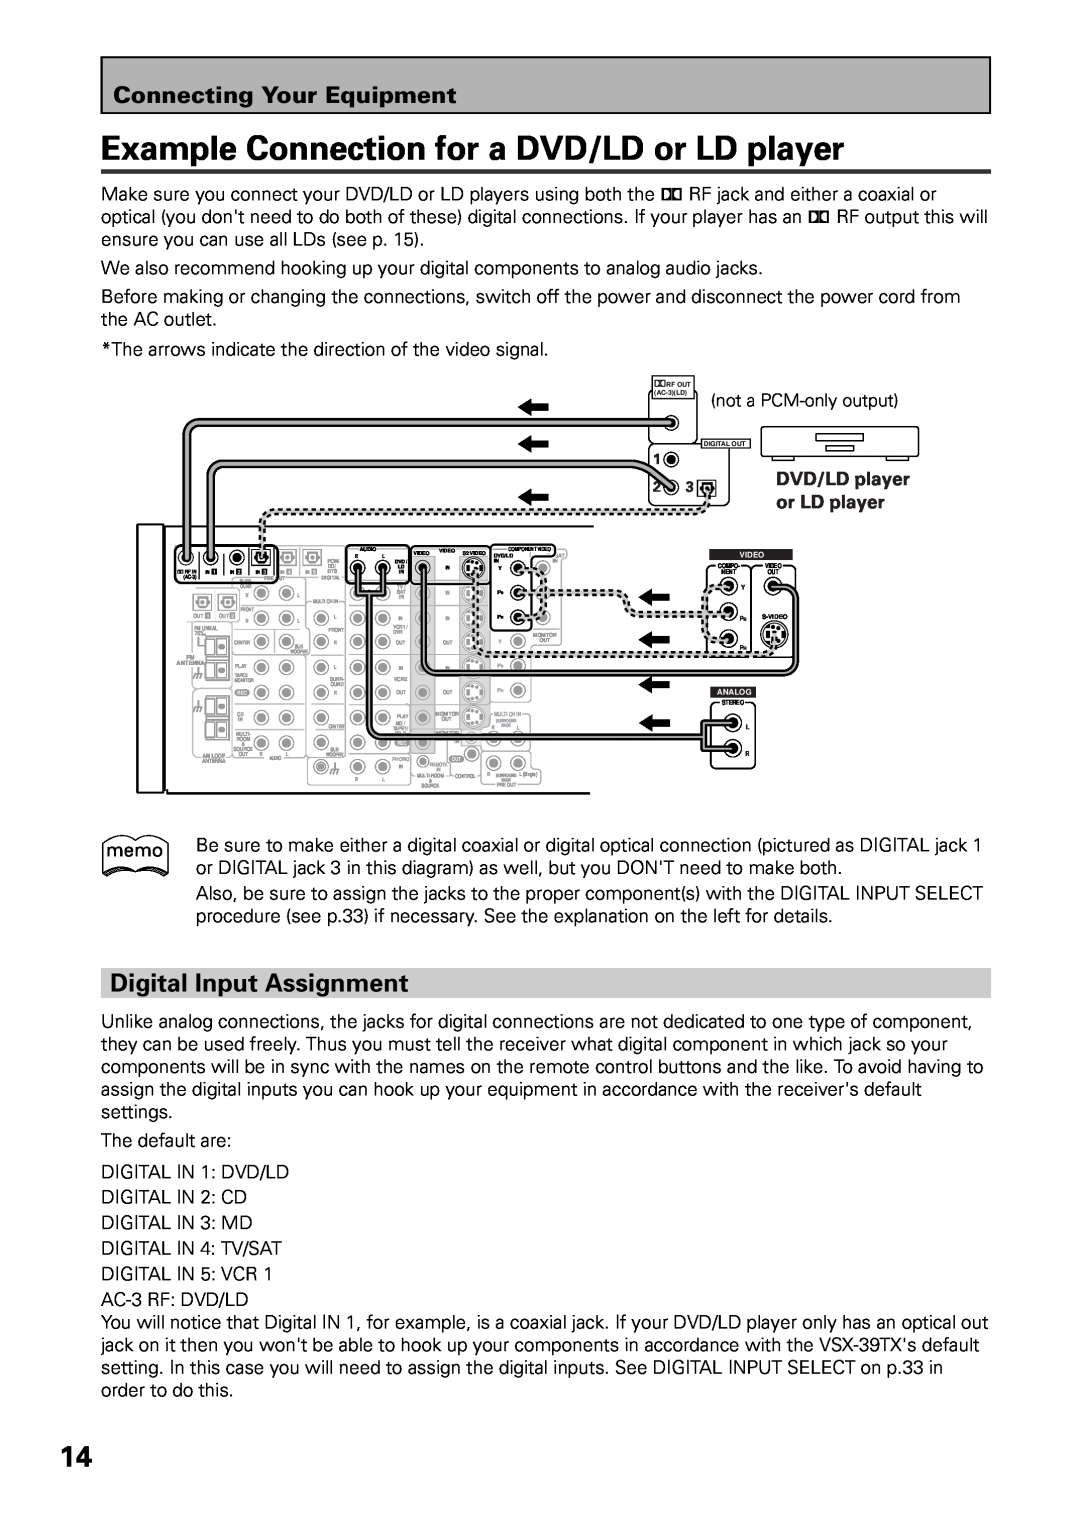 Pioneer VSX-39TX manual Example Connection for a DVD/LD or LD player, Digital Input Assignment, Connecting Your Equipment 